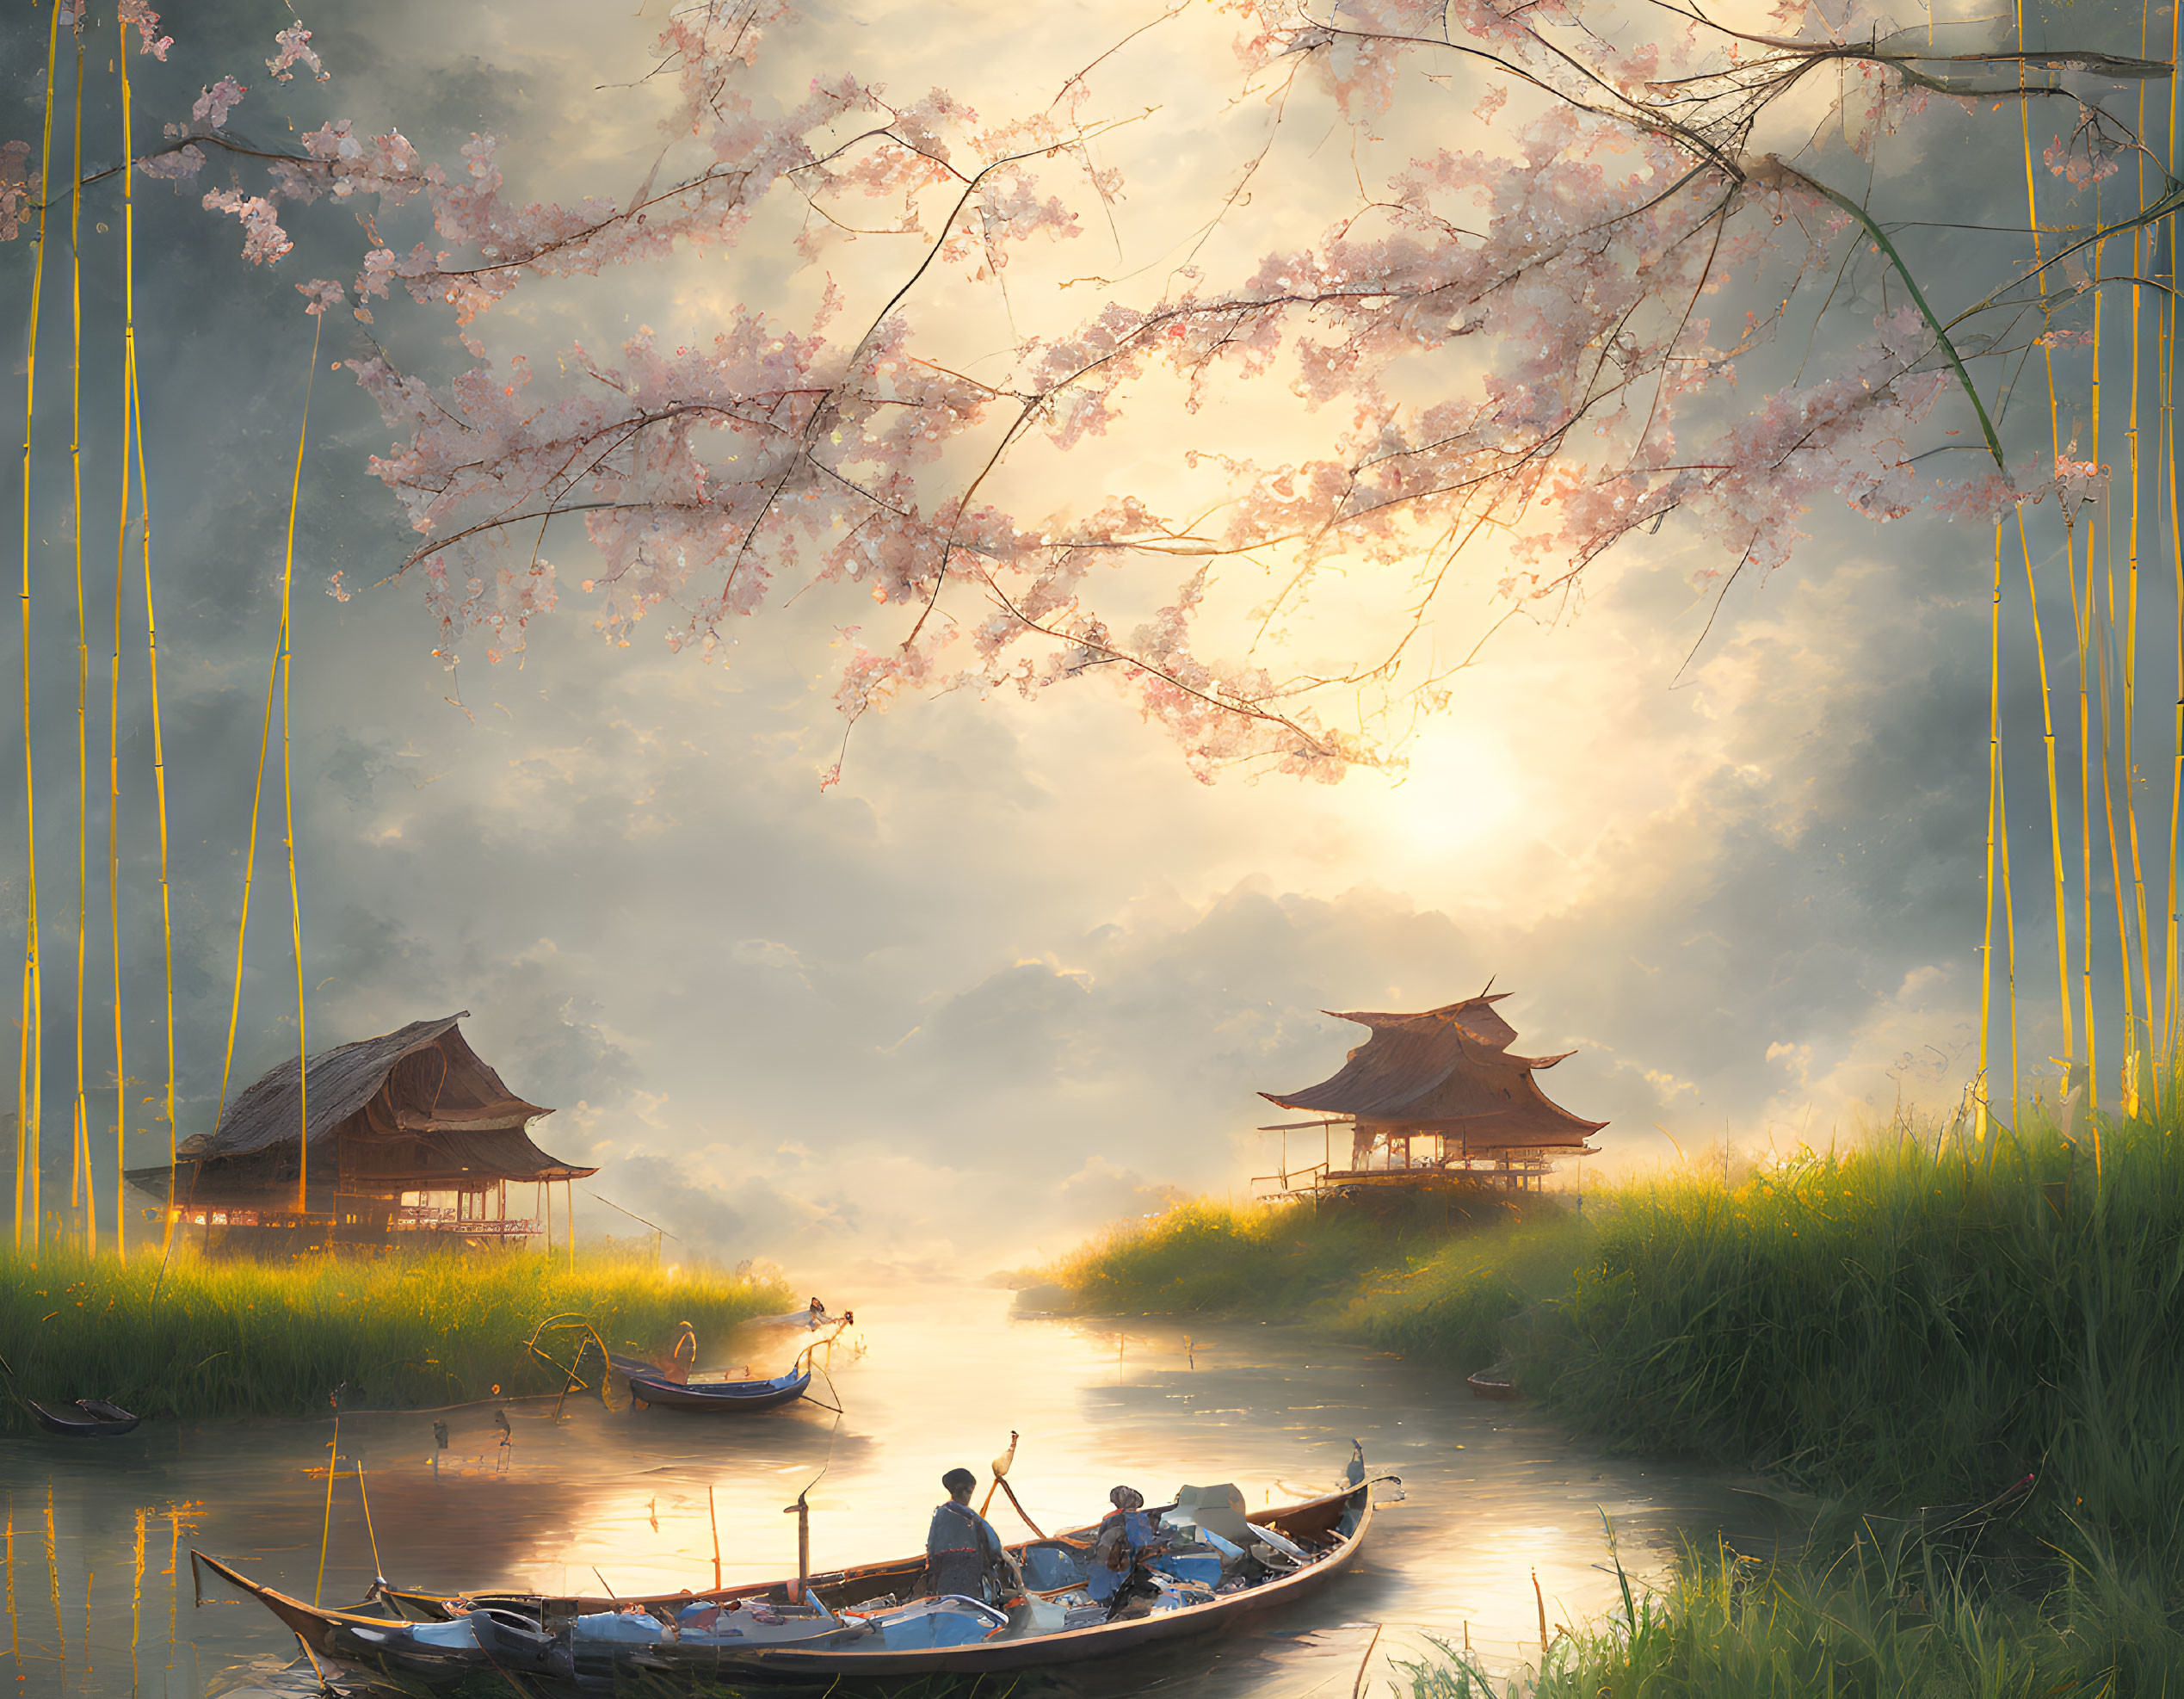 Tranquil River Scene with Cherry Blossoms, Boats, and Asian Buildings